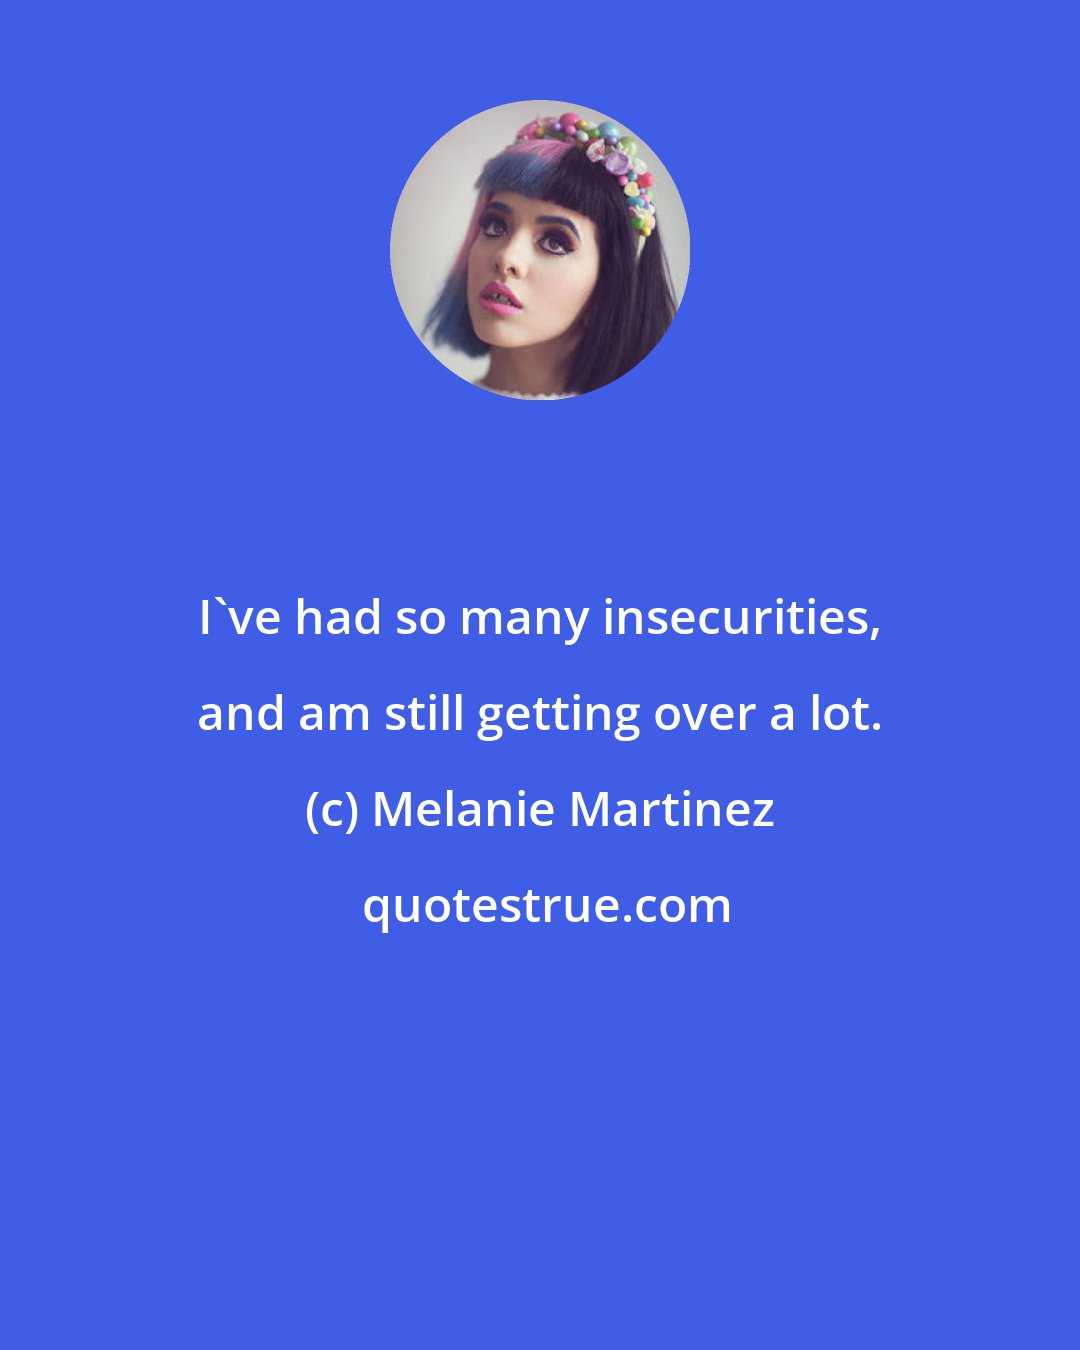 Melanie Martinez: I've had so many insecurities, and am still getting over a lot.